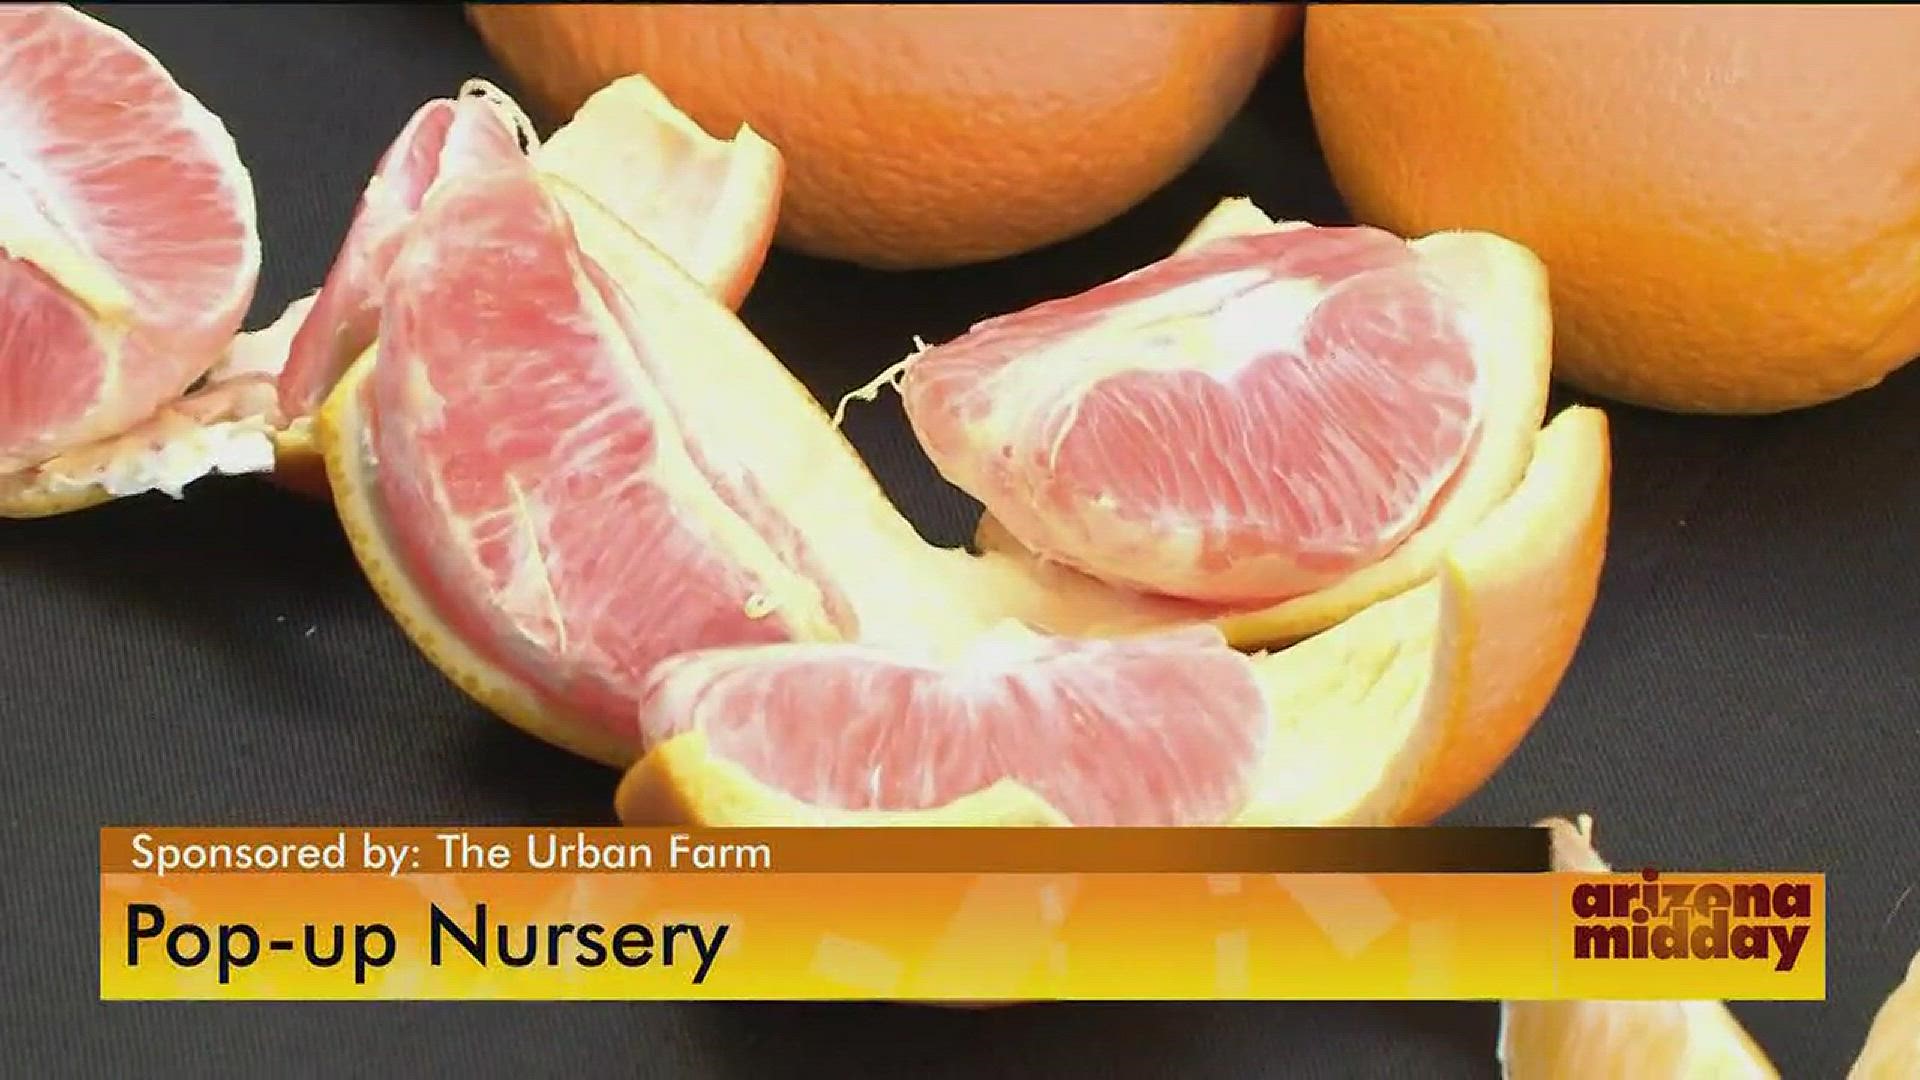 Urban Farm founder Greg Peterson shows us how to pick the right fruit tree for your home.